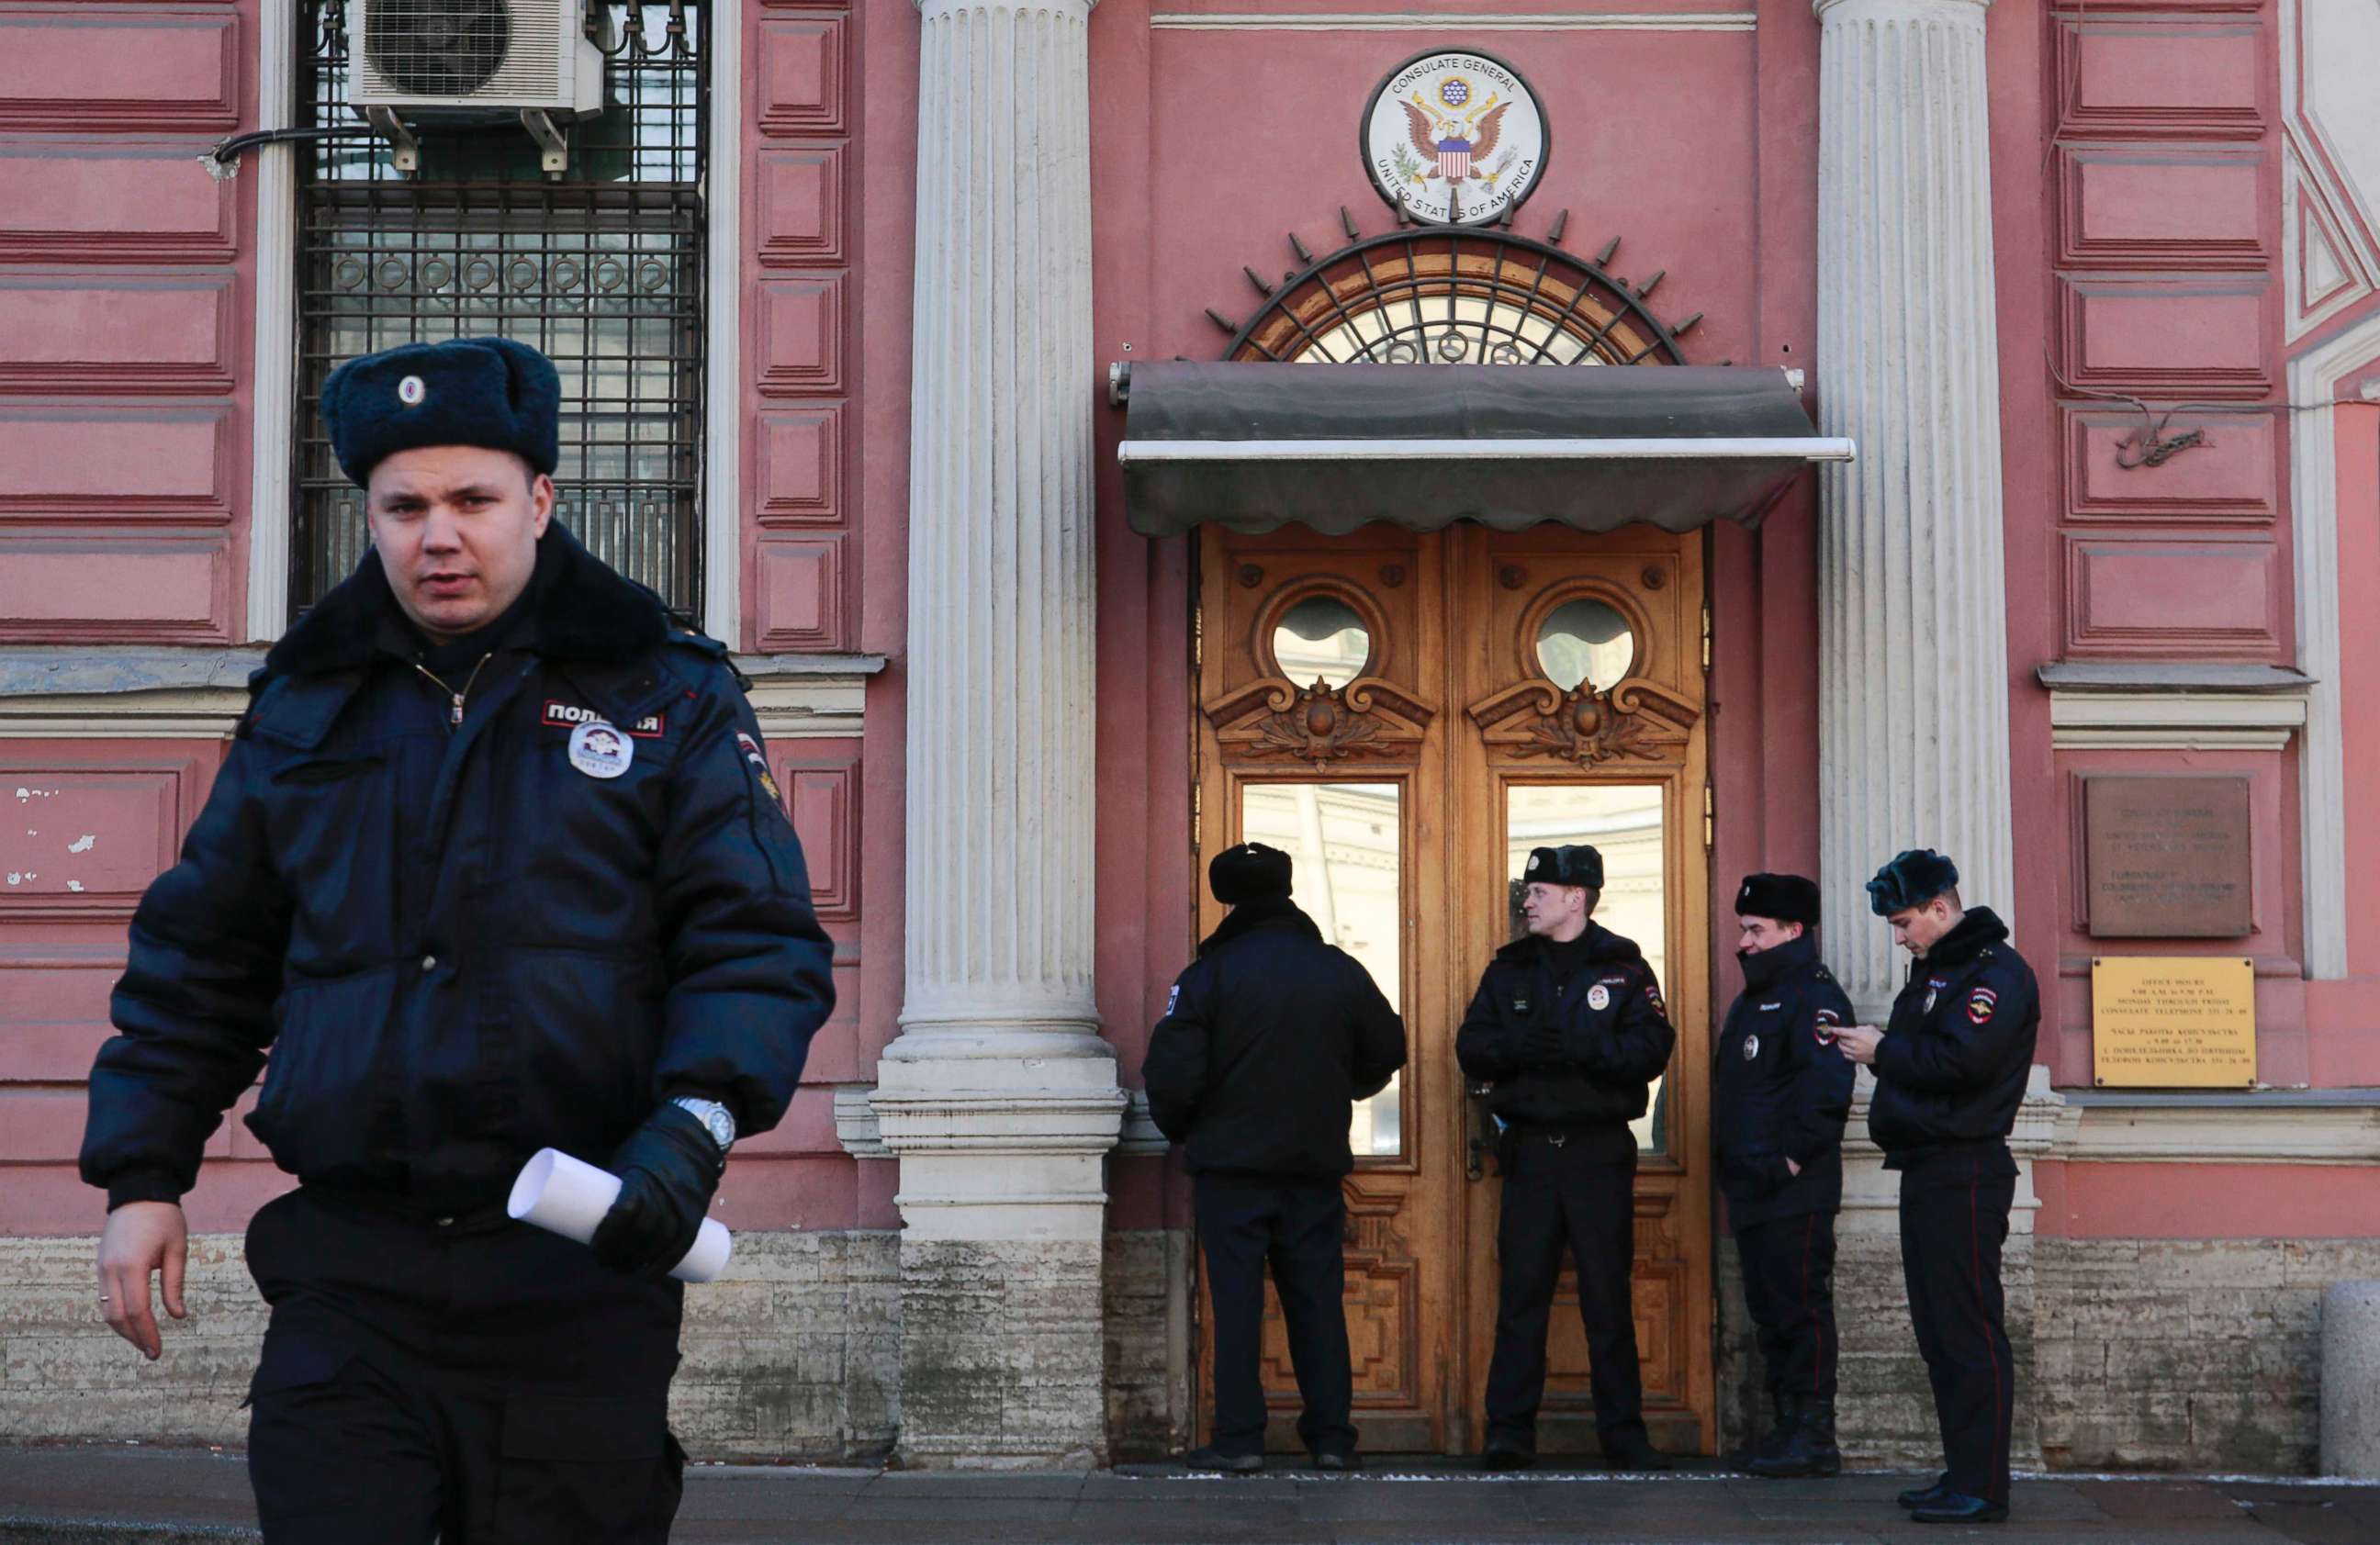 PHOTO: Policemen stand guard outside the building of the consulate-general of the U.S. in St. Petersburg, Russia, March 29, 2018.